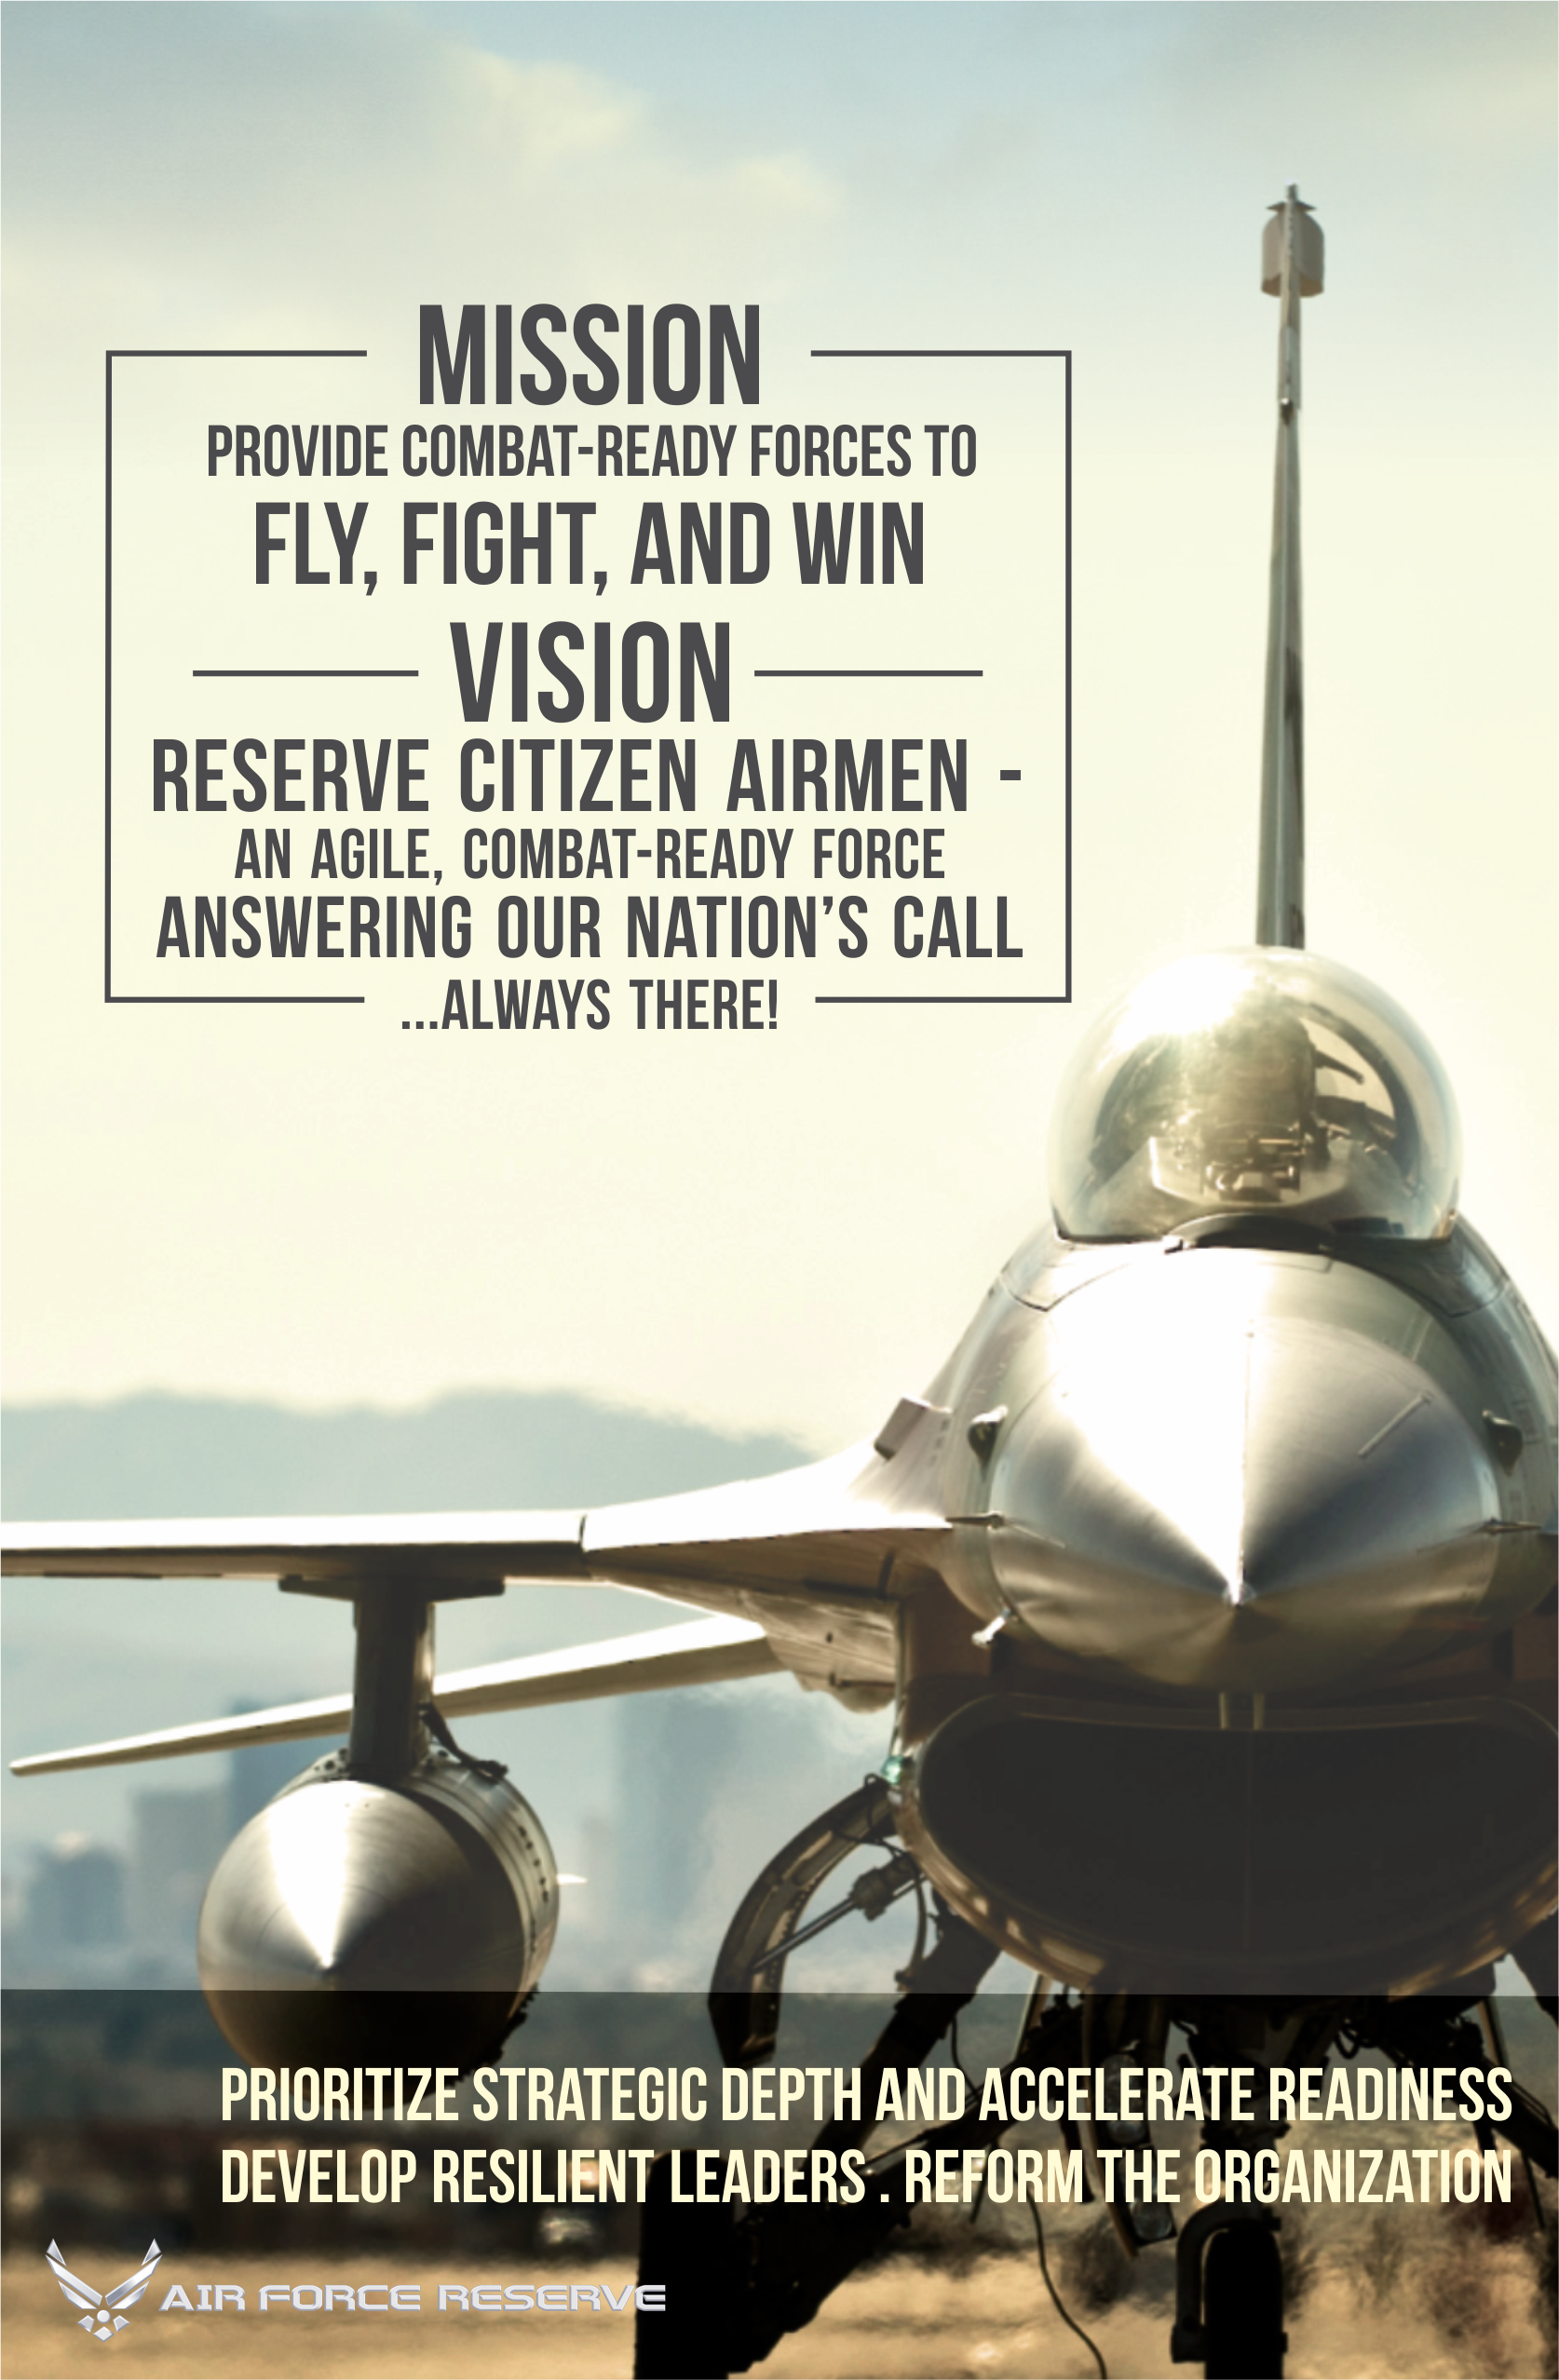 Air Force Reserve mision is to provide combat ready forces to fly, fight and win